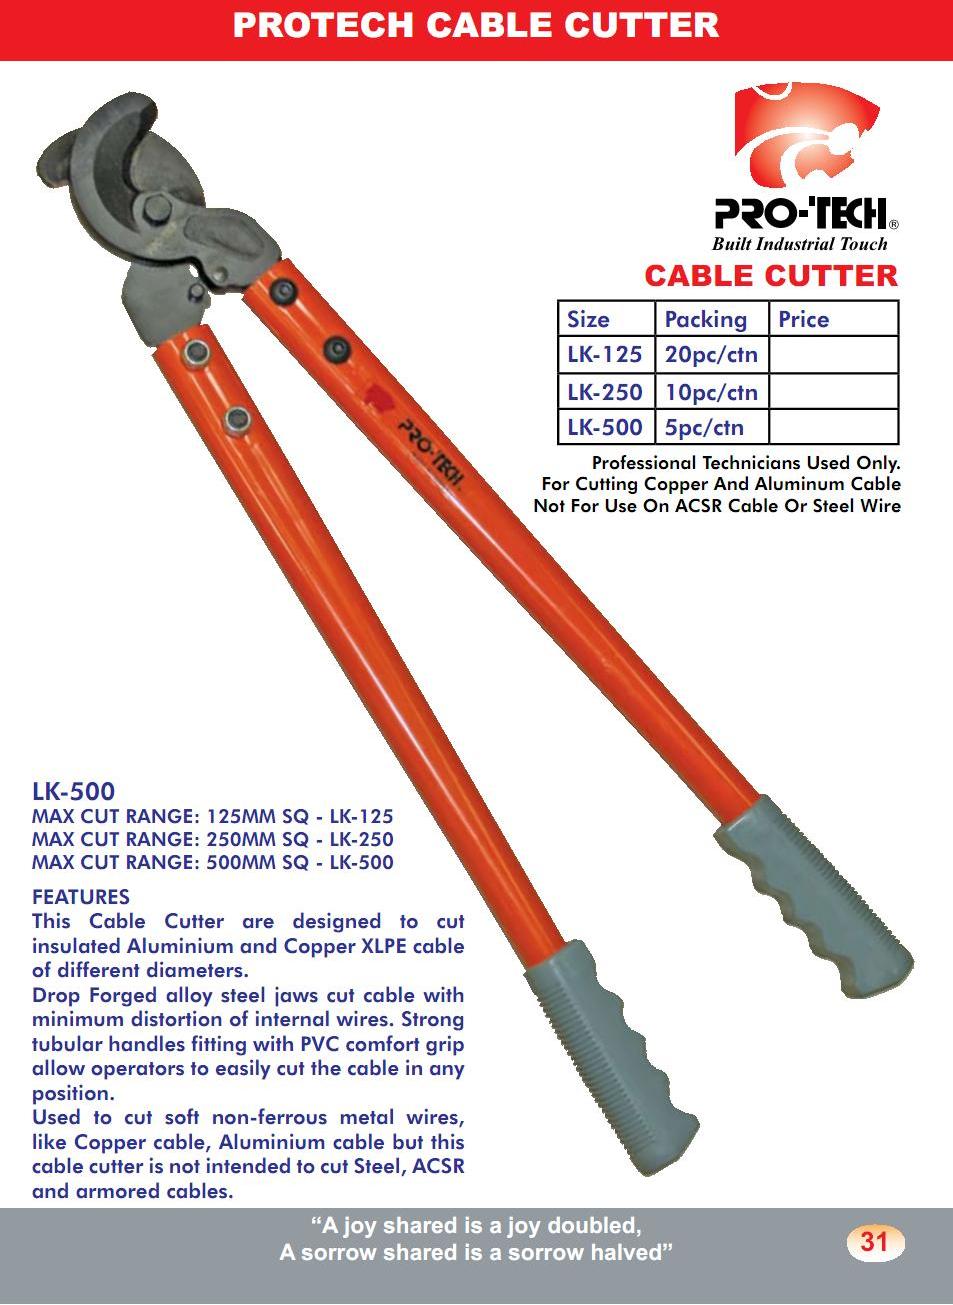 Pro Tech Cable Cutter